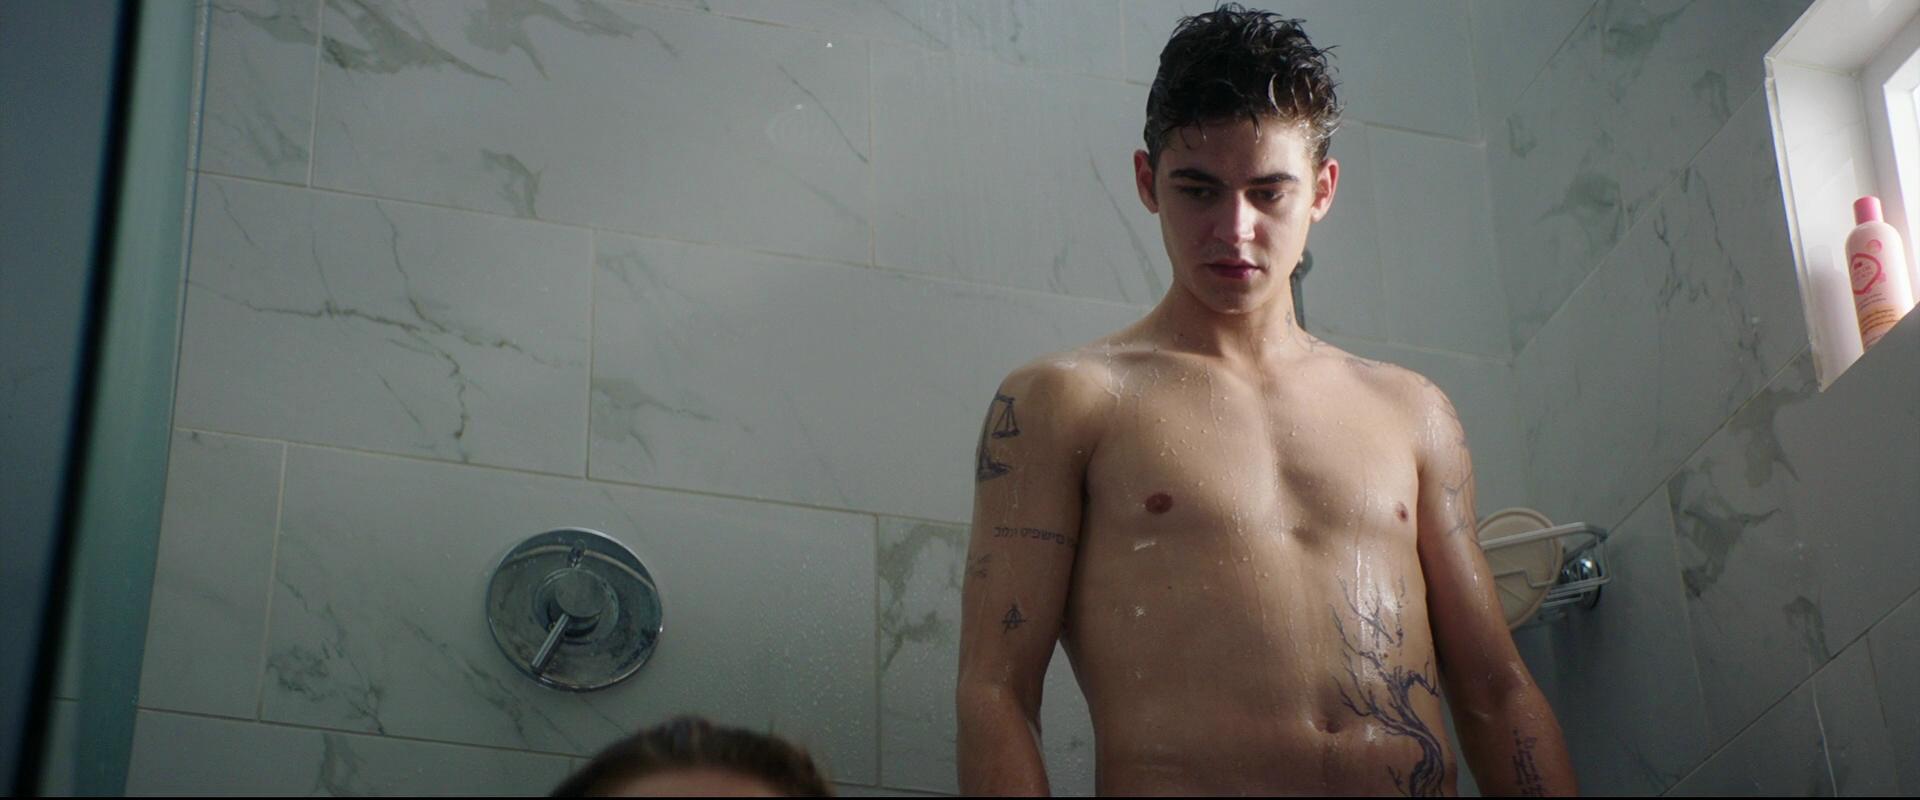 Casperfan: Hero Fiennes Tiffin naked bum in After We Collided.